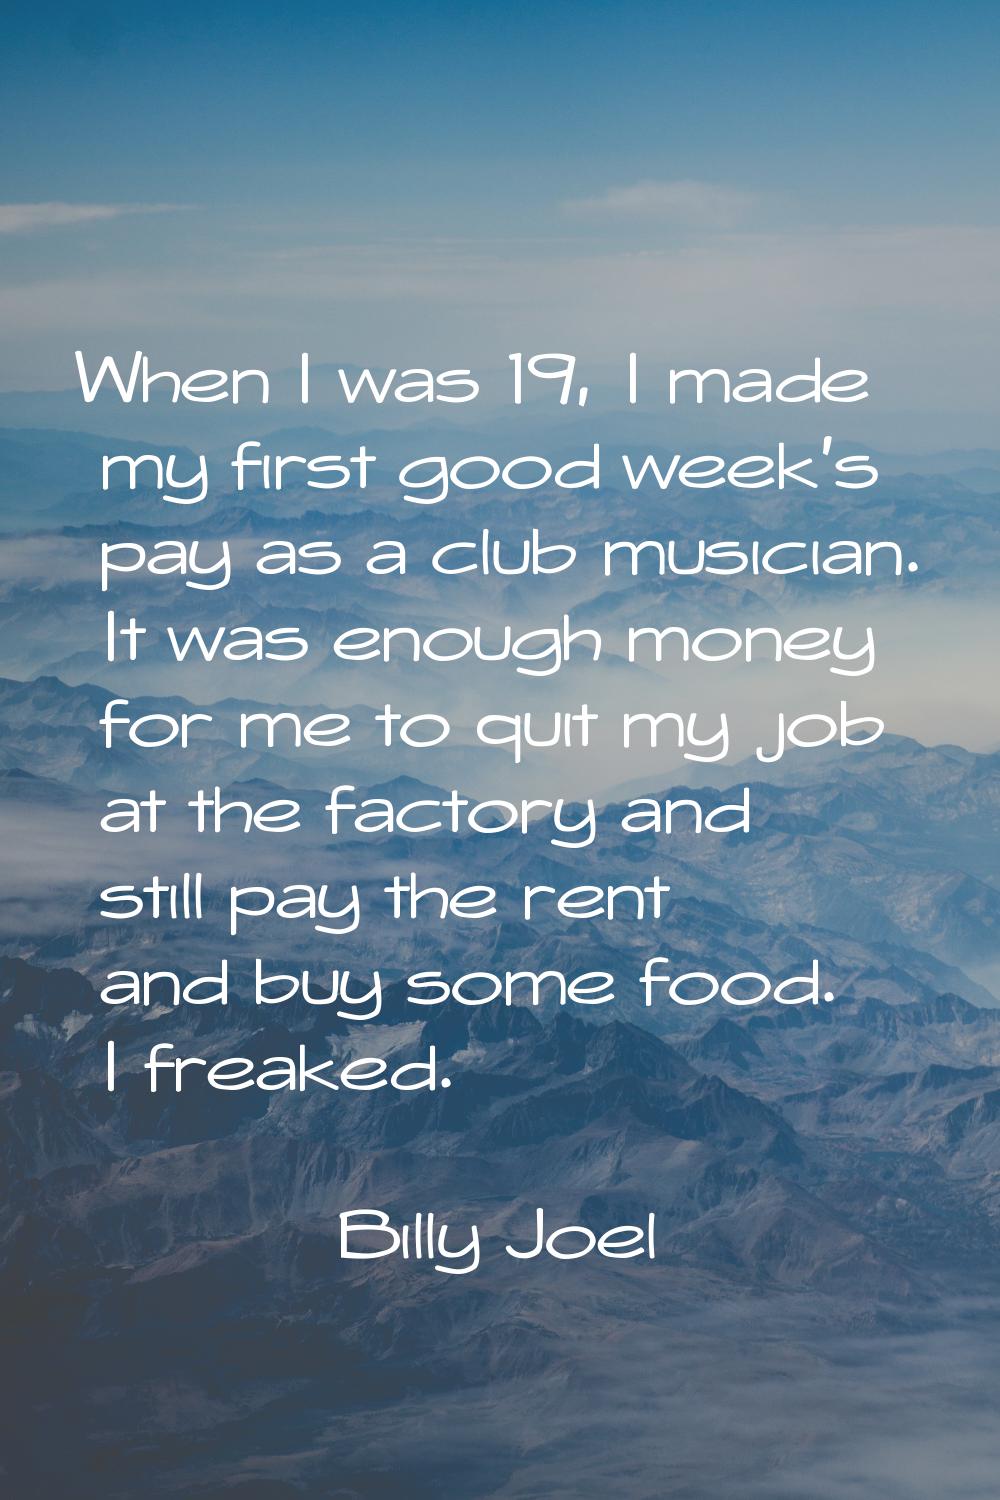 When I was 19, I made my first good week's pay as a club musician. It was enough money for me to qu